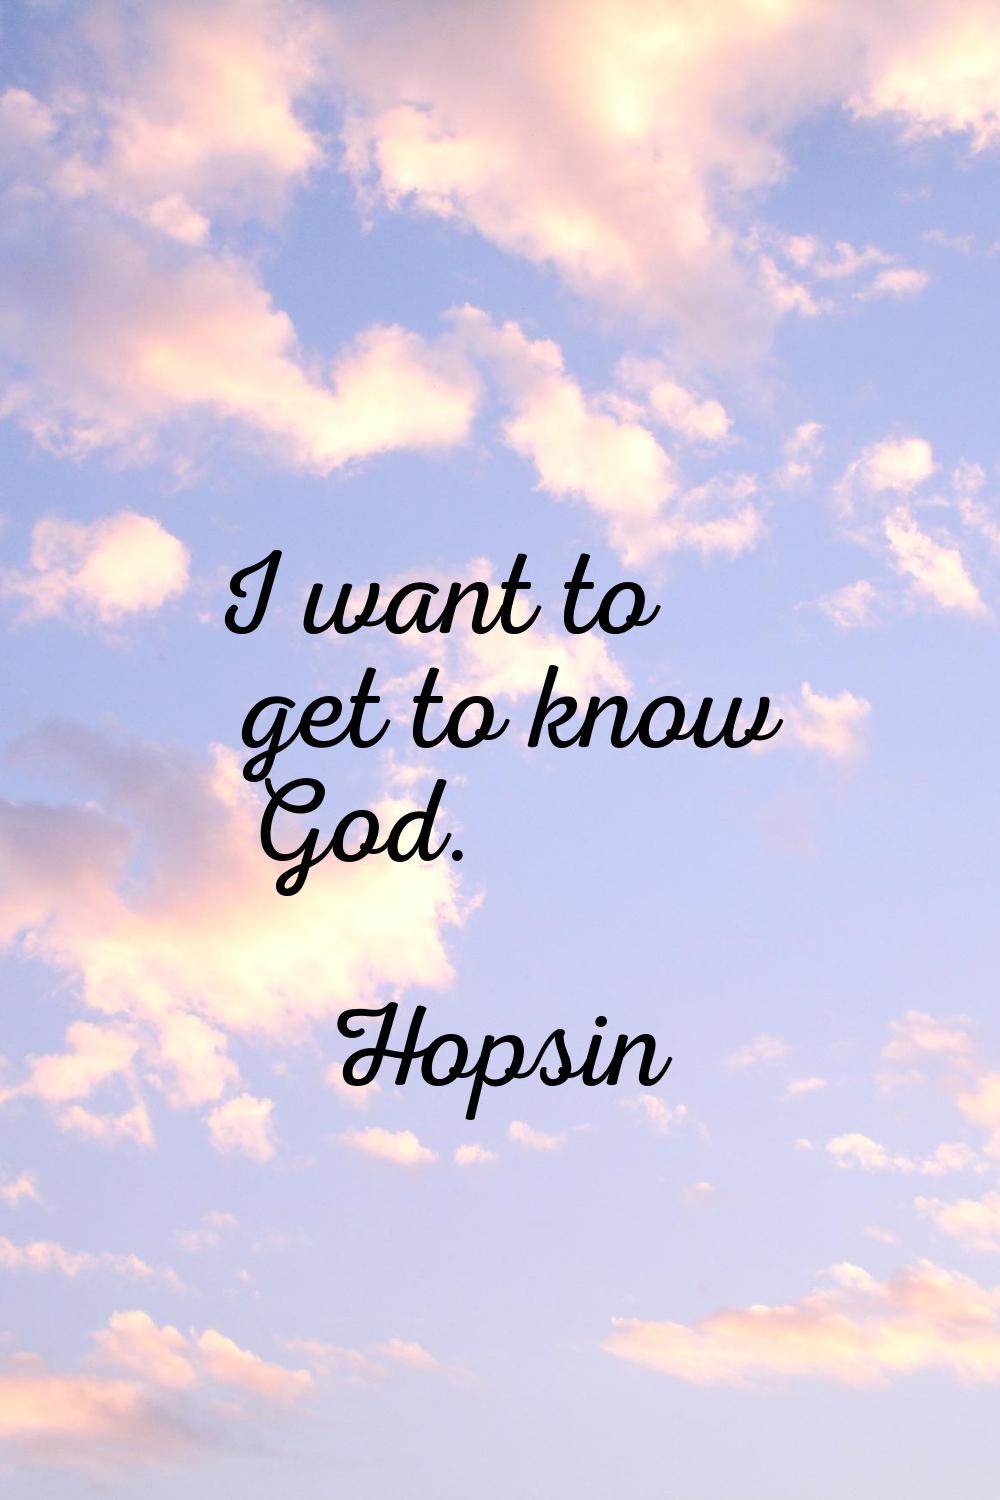 I want to get to know God.